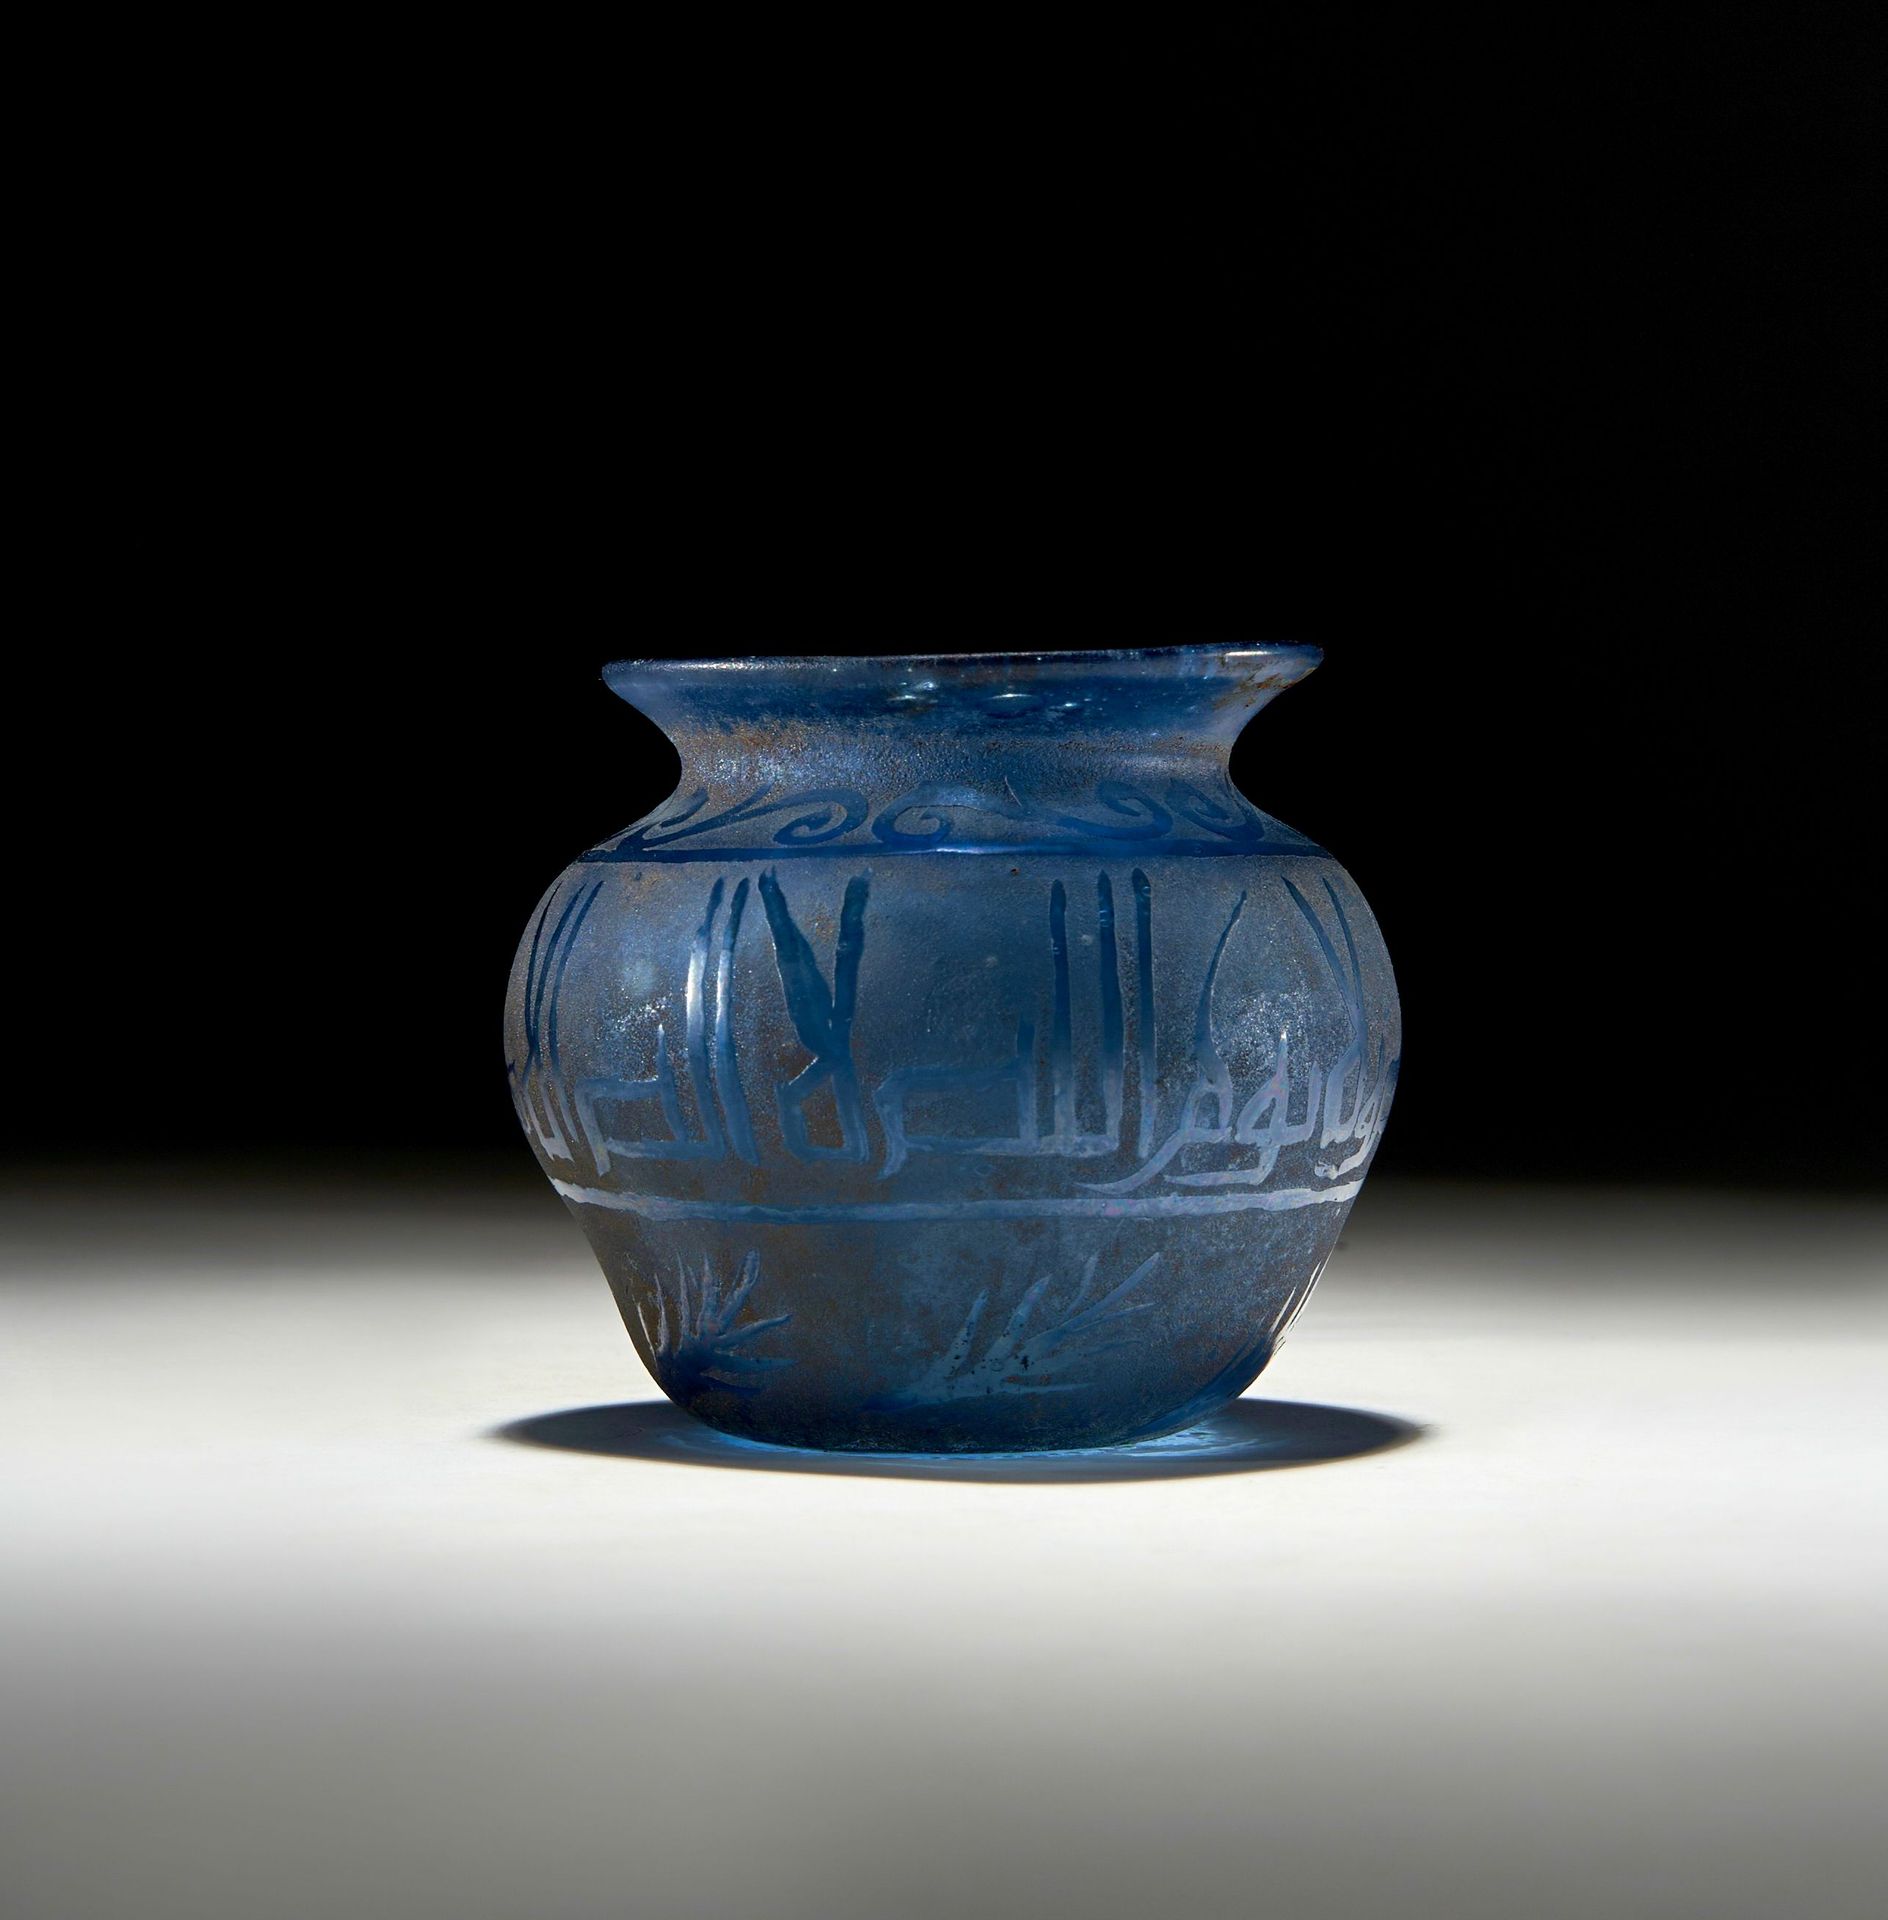 A KUFIC INSCRIBED BLUE GLASS POT, PROBABLY 9TH-11TH CENTURY A.D. EIN BLAUES GLAS&hellip;